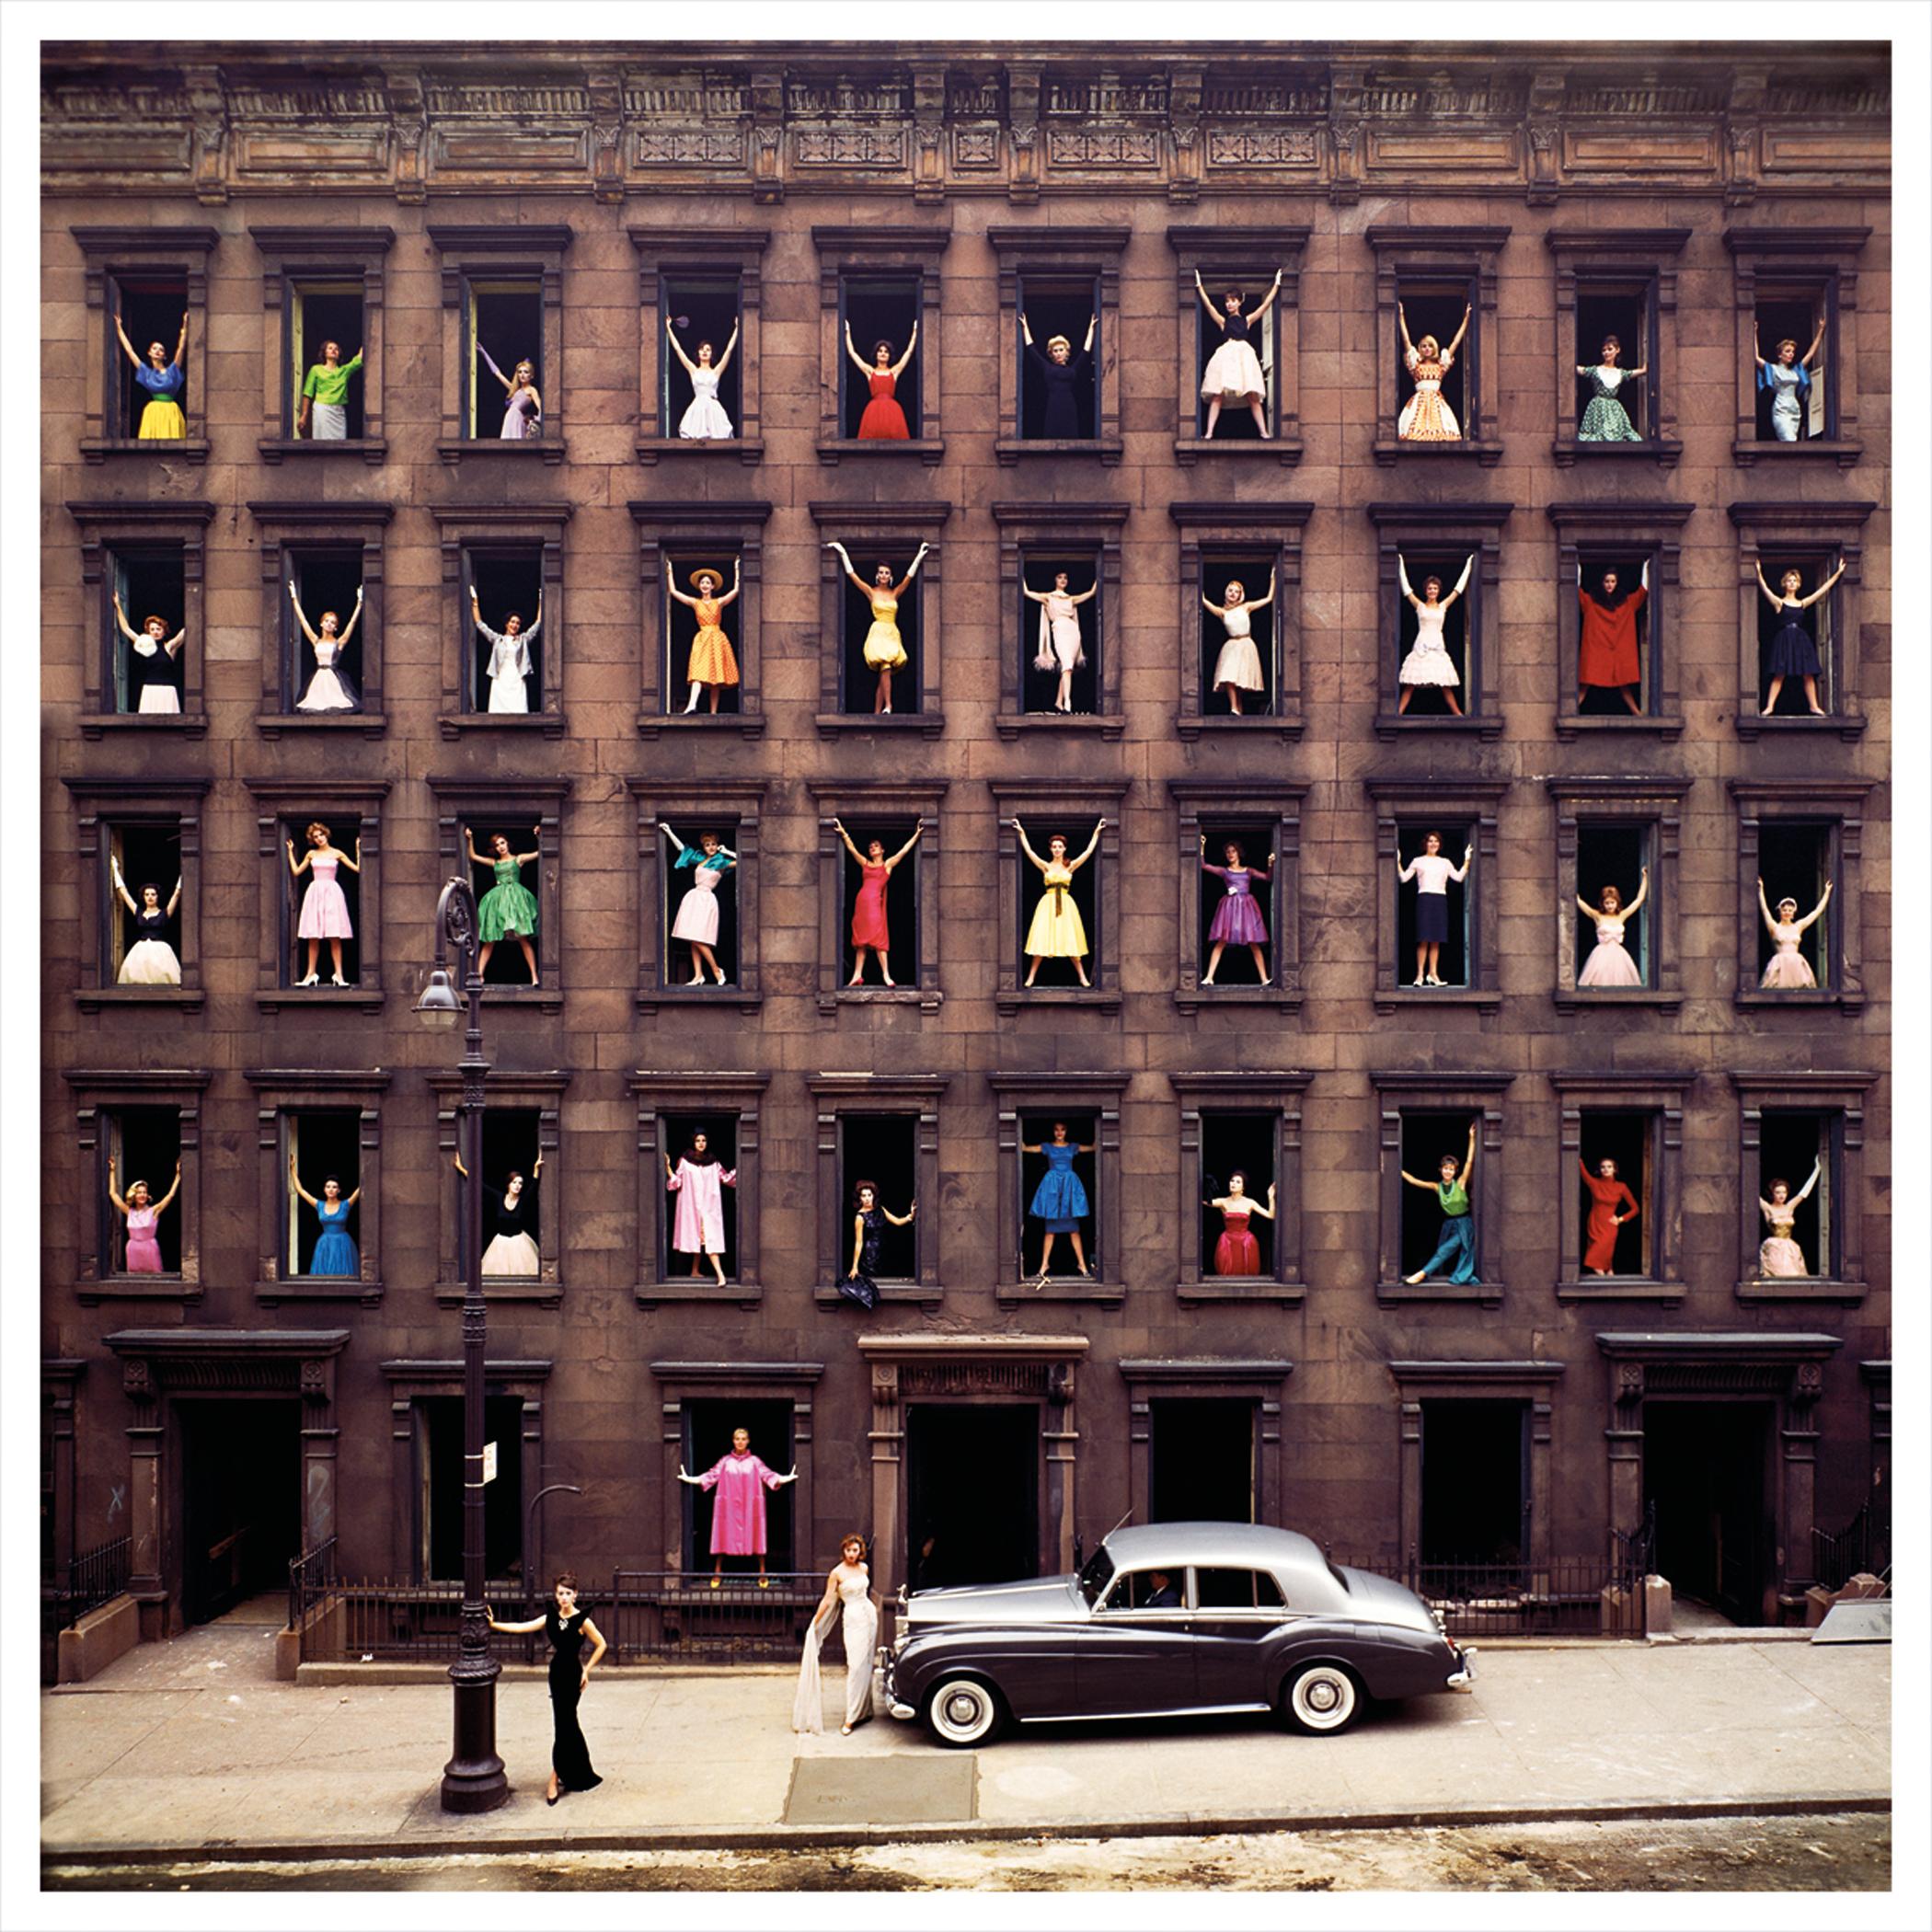 Ormond Gigli
Girls in the Window, 1960 (printed later)
Color coupler print
37 x 37 inches
AP 4/8
Signed, numbered and dated by the artist

Ormond Gigli: The Visionary Behind the "Girls in the Windows"
Ormond Gigli is a highly regarded American